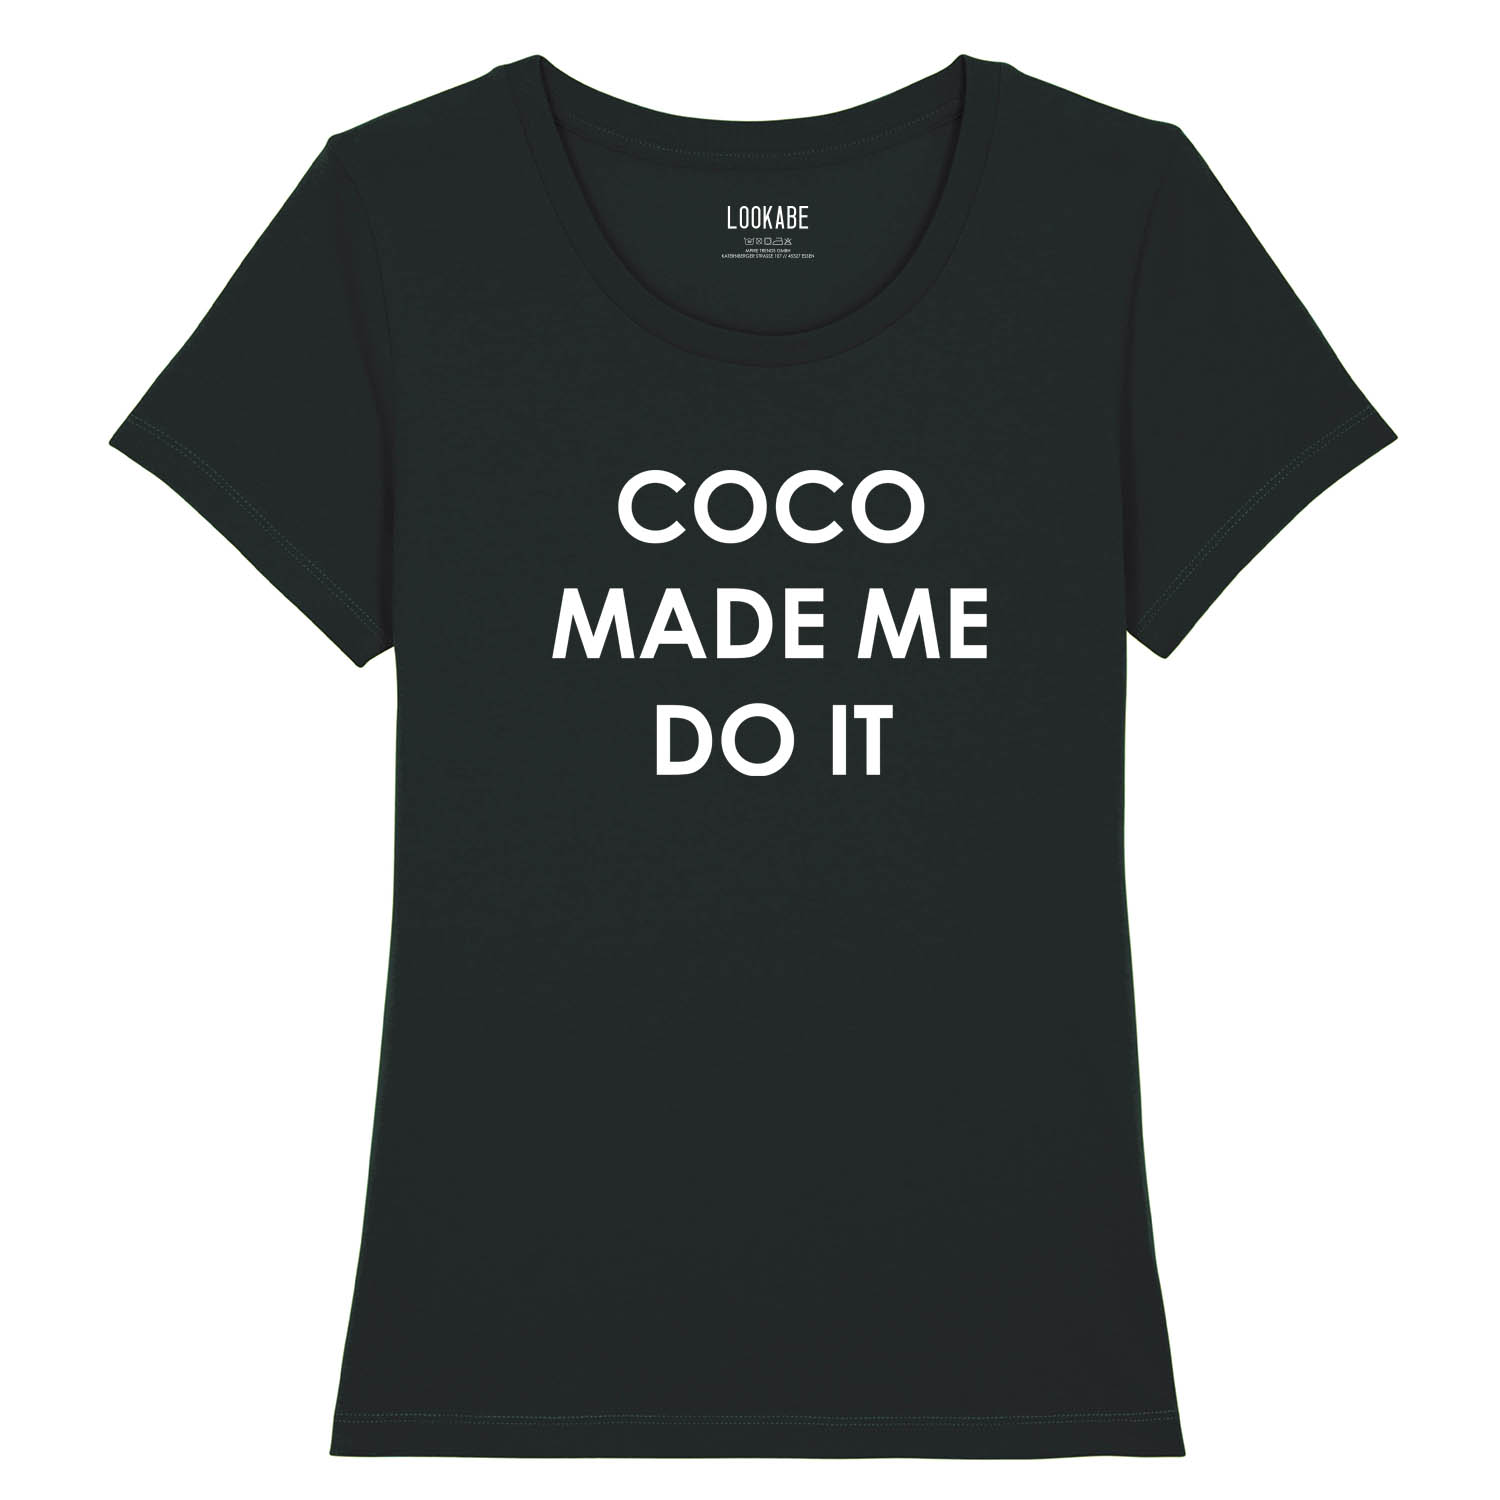 T-Shirt - Coco made me do it